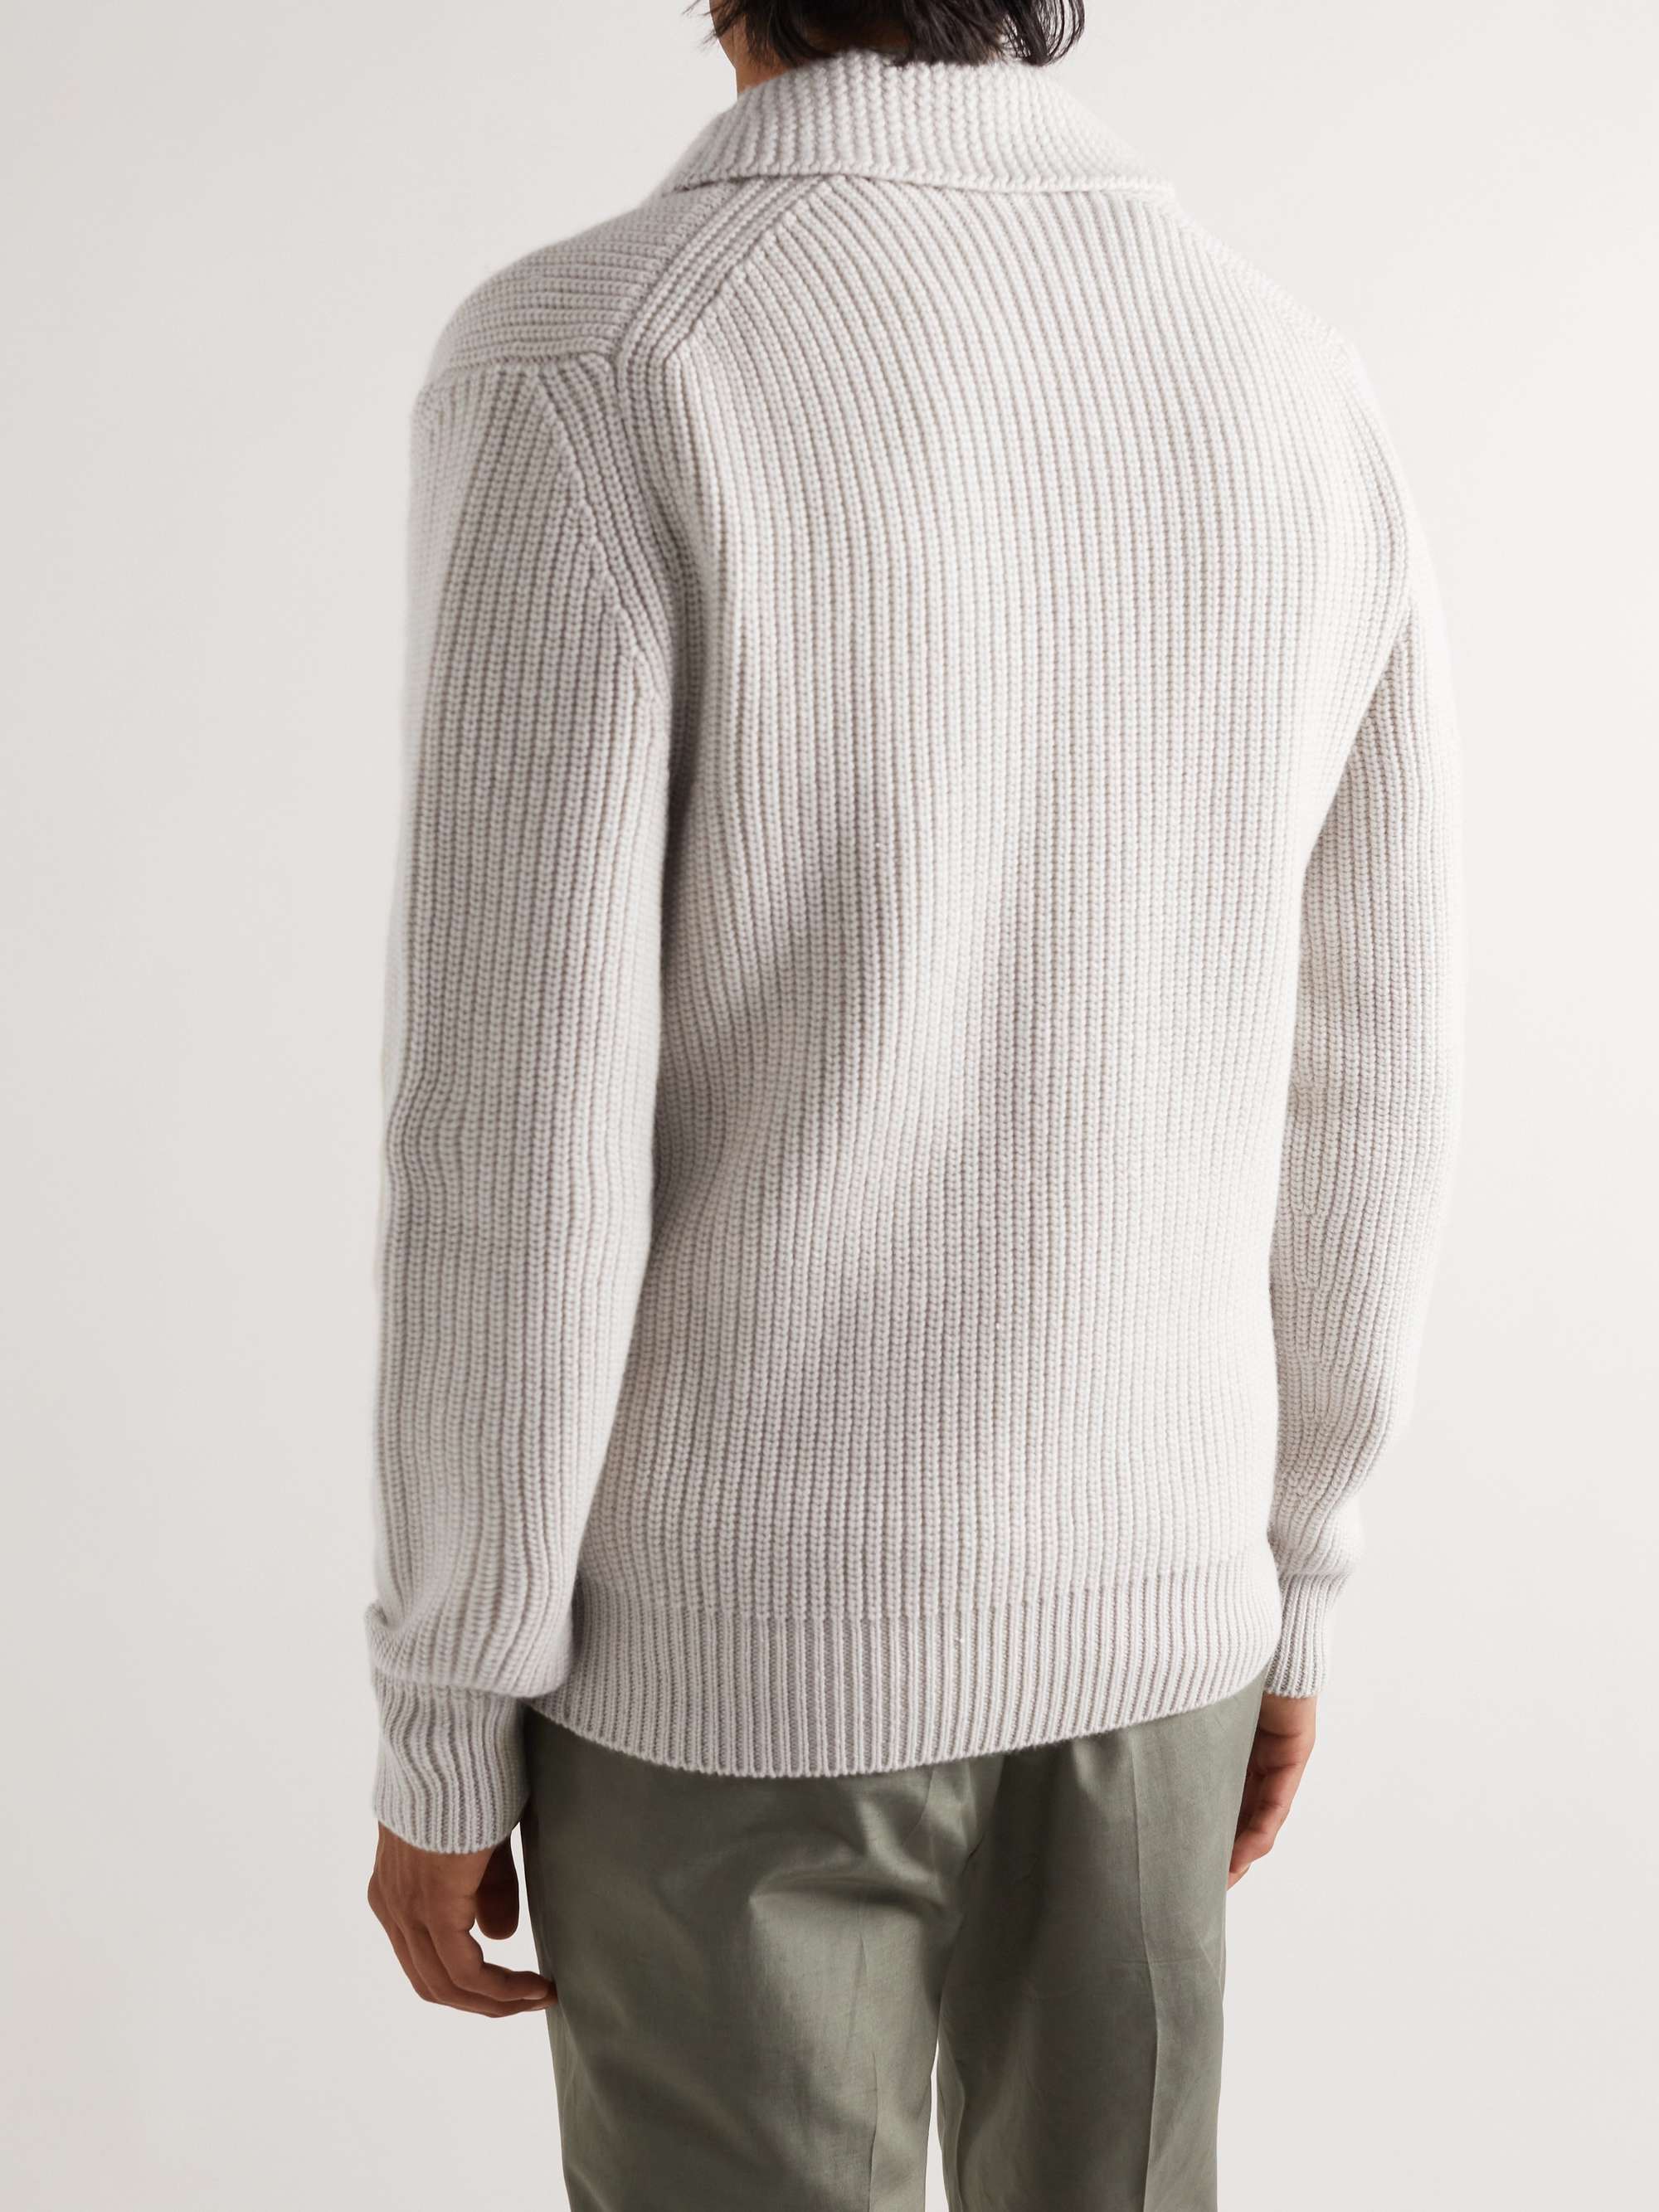 TOM FORD Shawl-Collar Ribbed Cashmere and Linen-Blend Cardigan